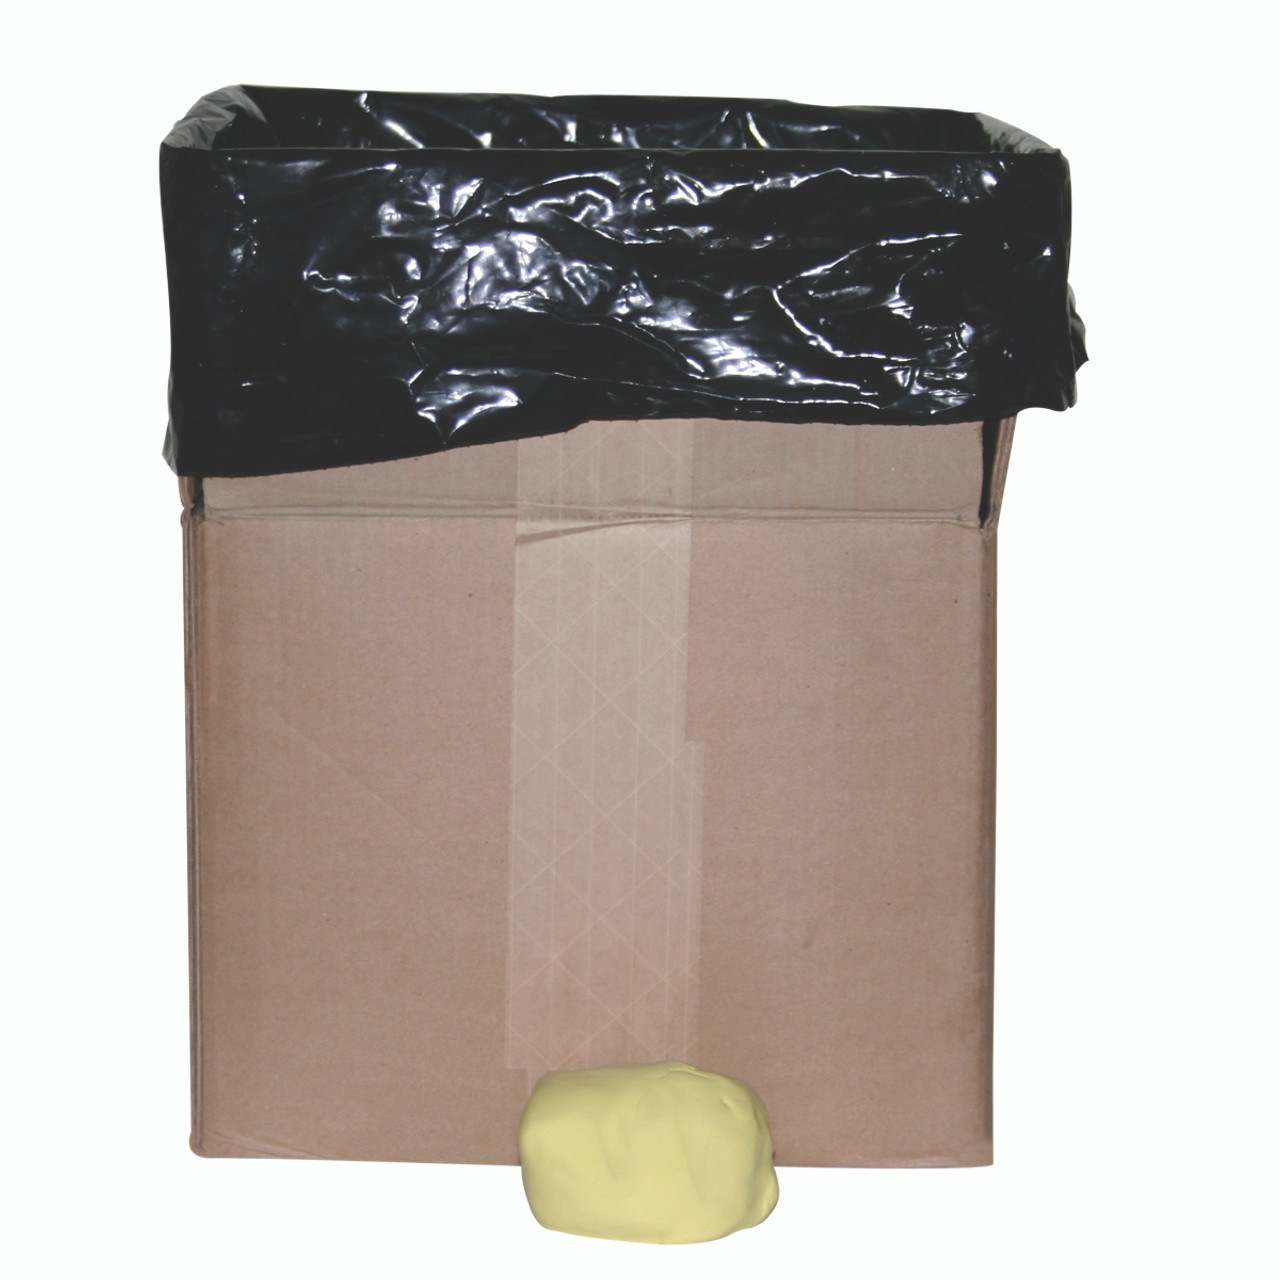 CanDo¨ Theraputty¨ Exercise Material - 50 lb - Yellow - X-soft